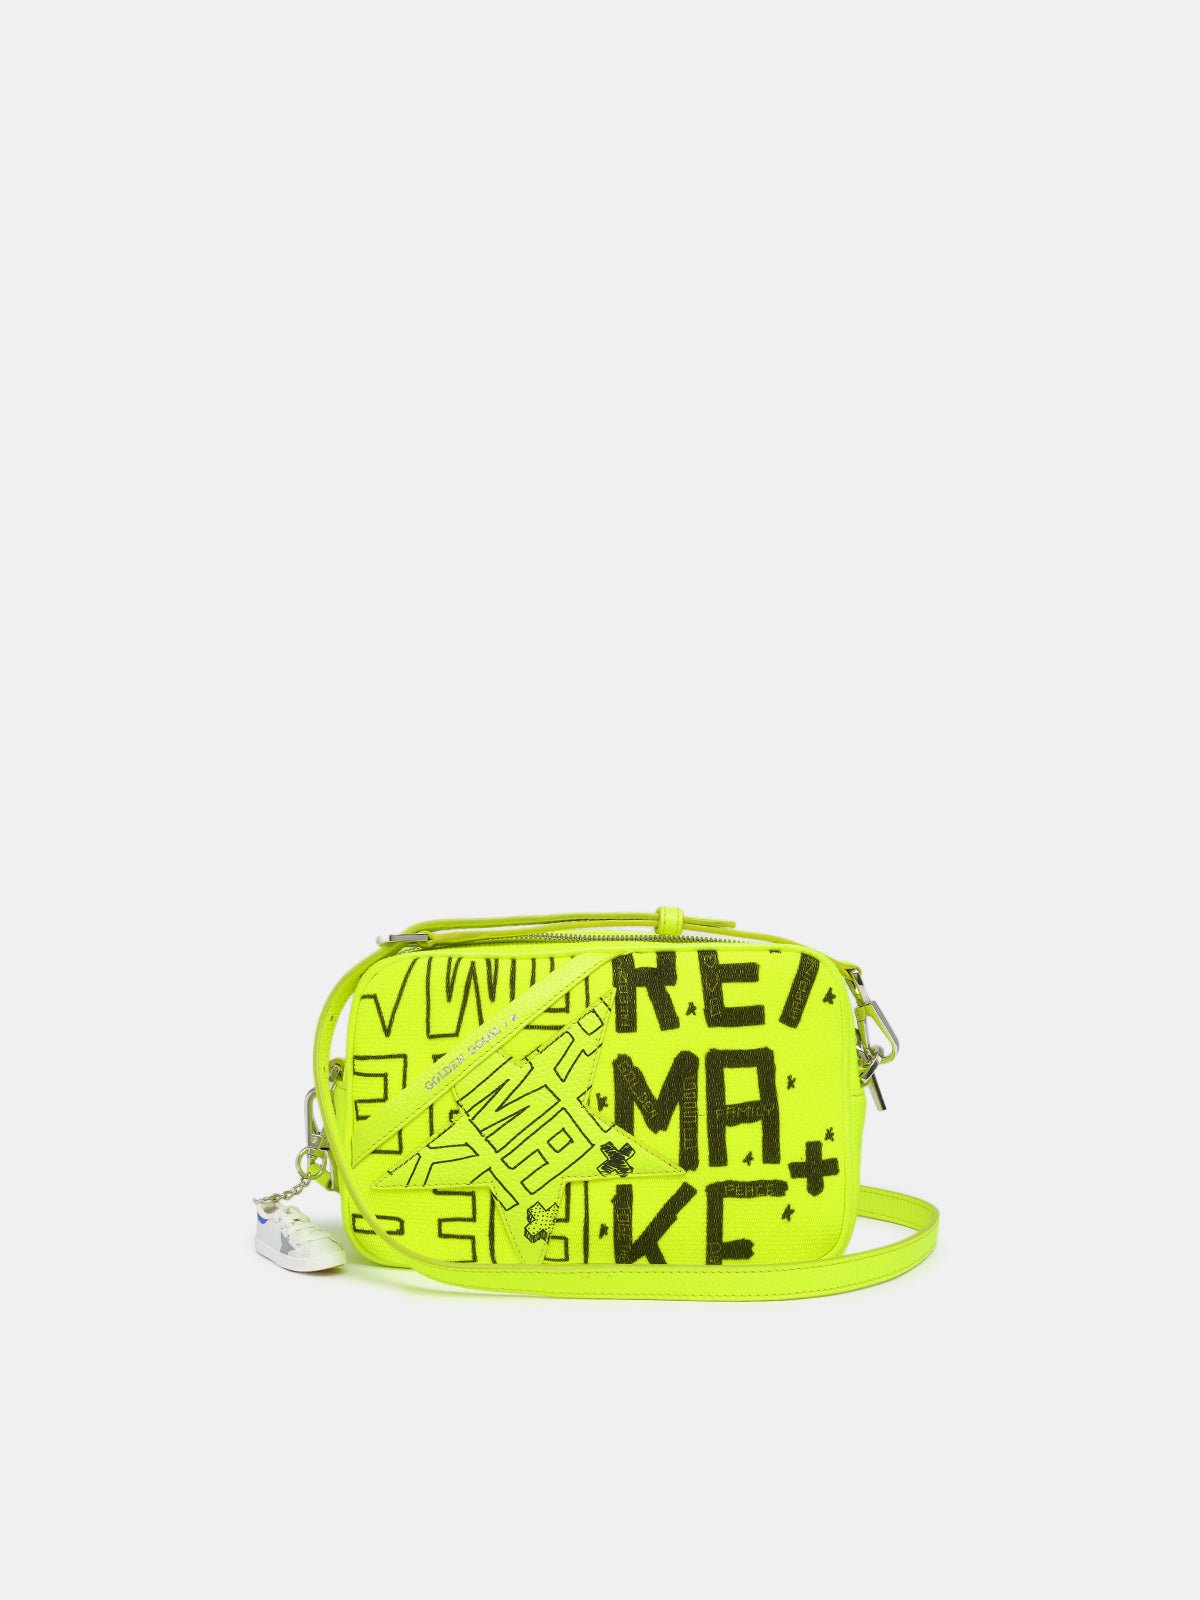 Fluorescent yellow Star Bag in canvas with Sneakers Maker print - thegreatputonmvFluorescent yellow Star Bag in canvas with Sneakers Maker printFluorescent yellow Star Bag in canvas with Sneakers Maker printFluorescent yellow Star Bag in canvas with Sneakers Maker printHandbagGolden Goosethegreatputonmv107510Fluorescent yellow Star Bag in canvas with Sneakers Maker print43977401